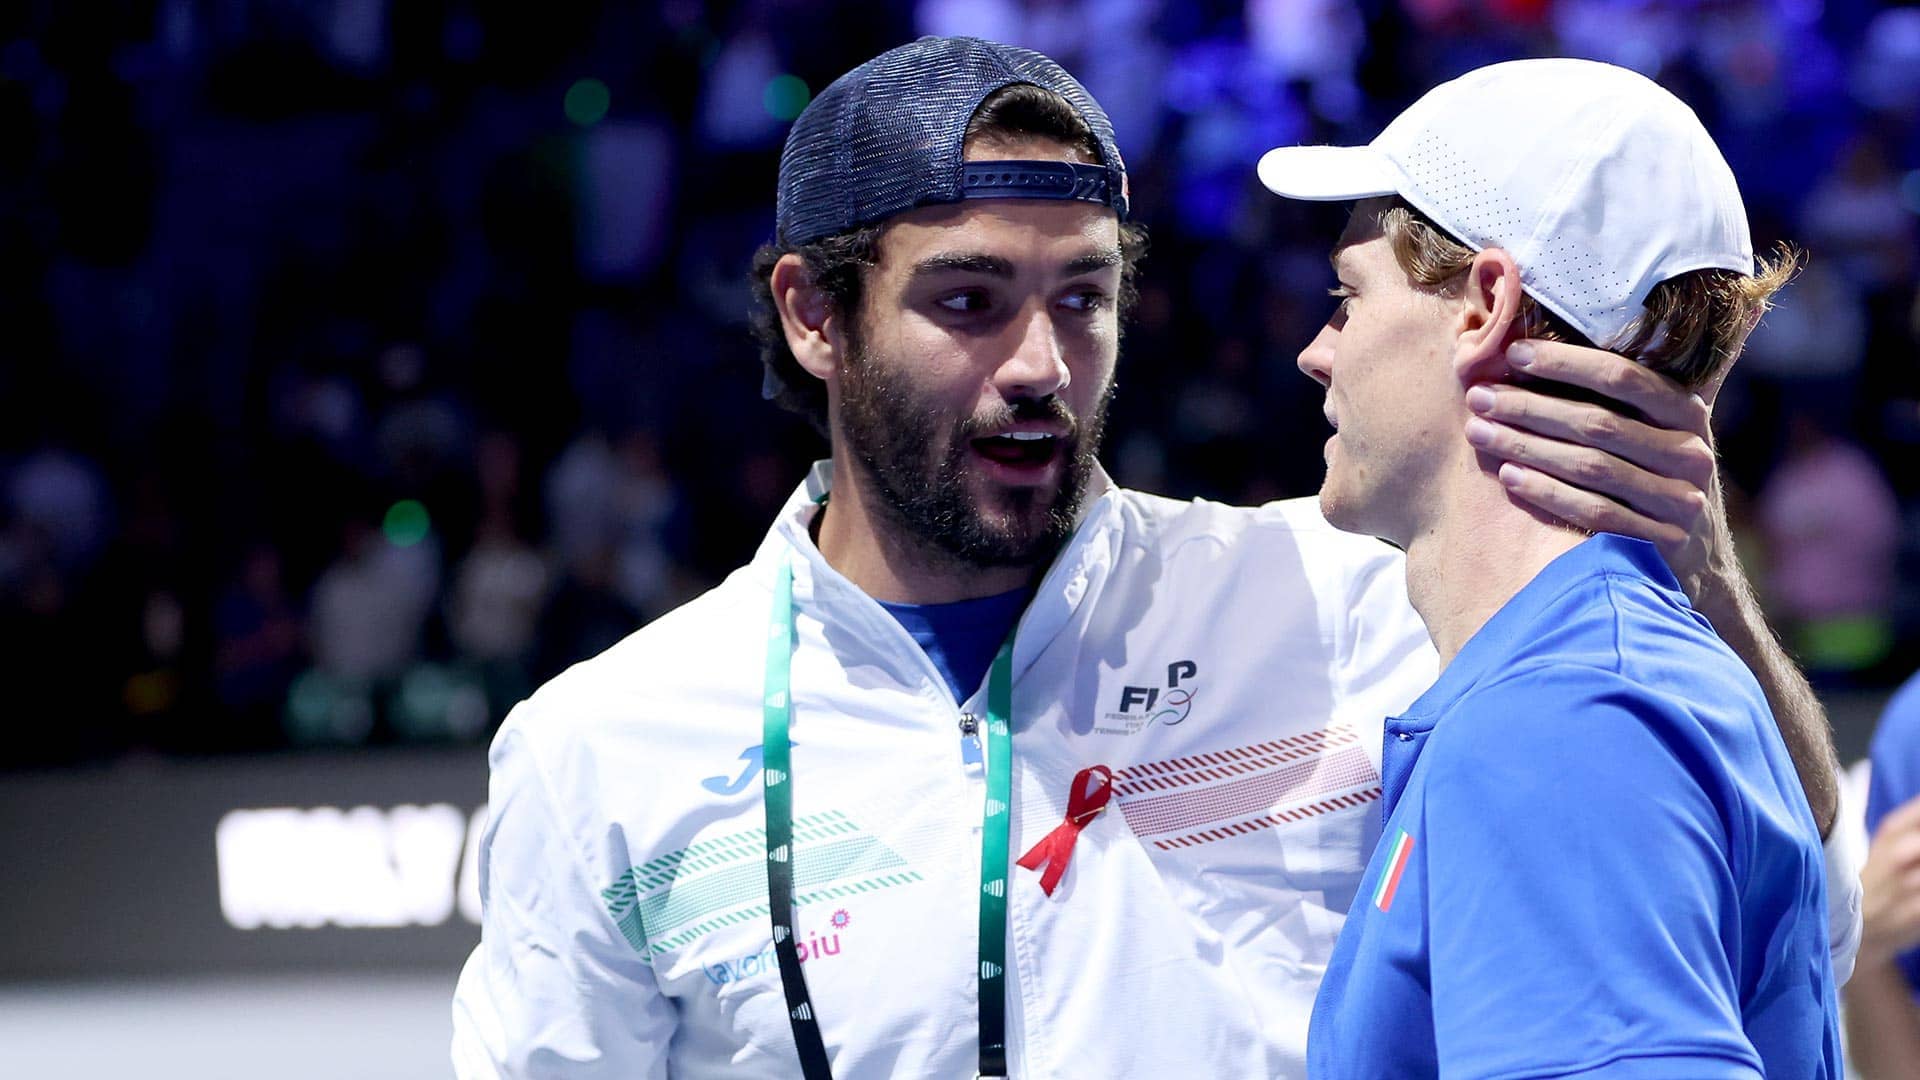 Matteo Berrettini admits he was lost for words when he watched Jannik Sinner compete at the Davis Cup last year.